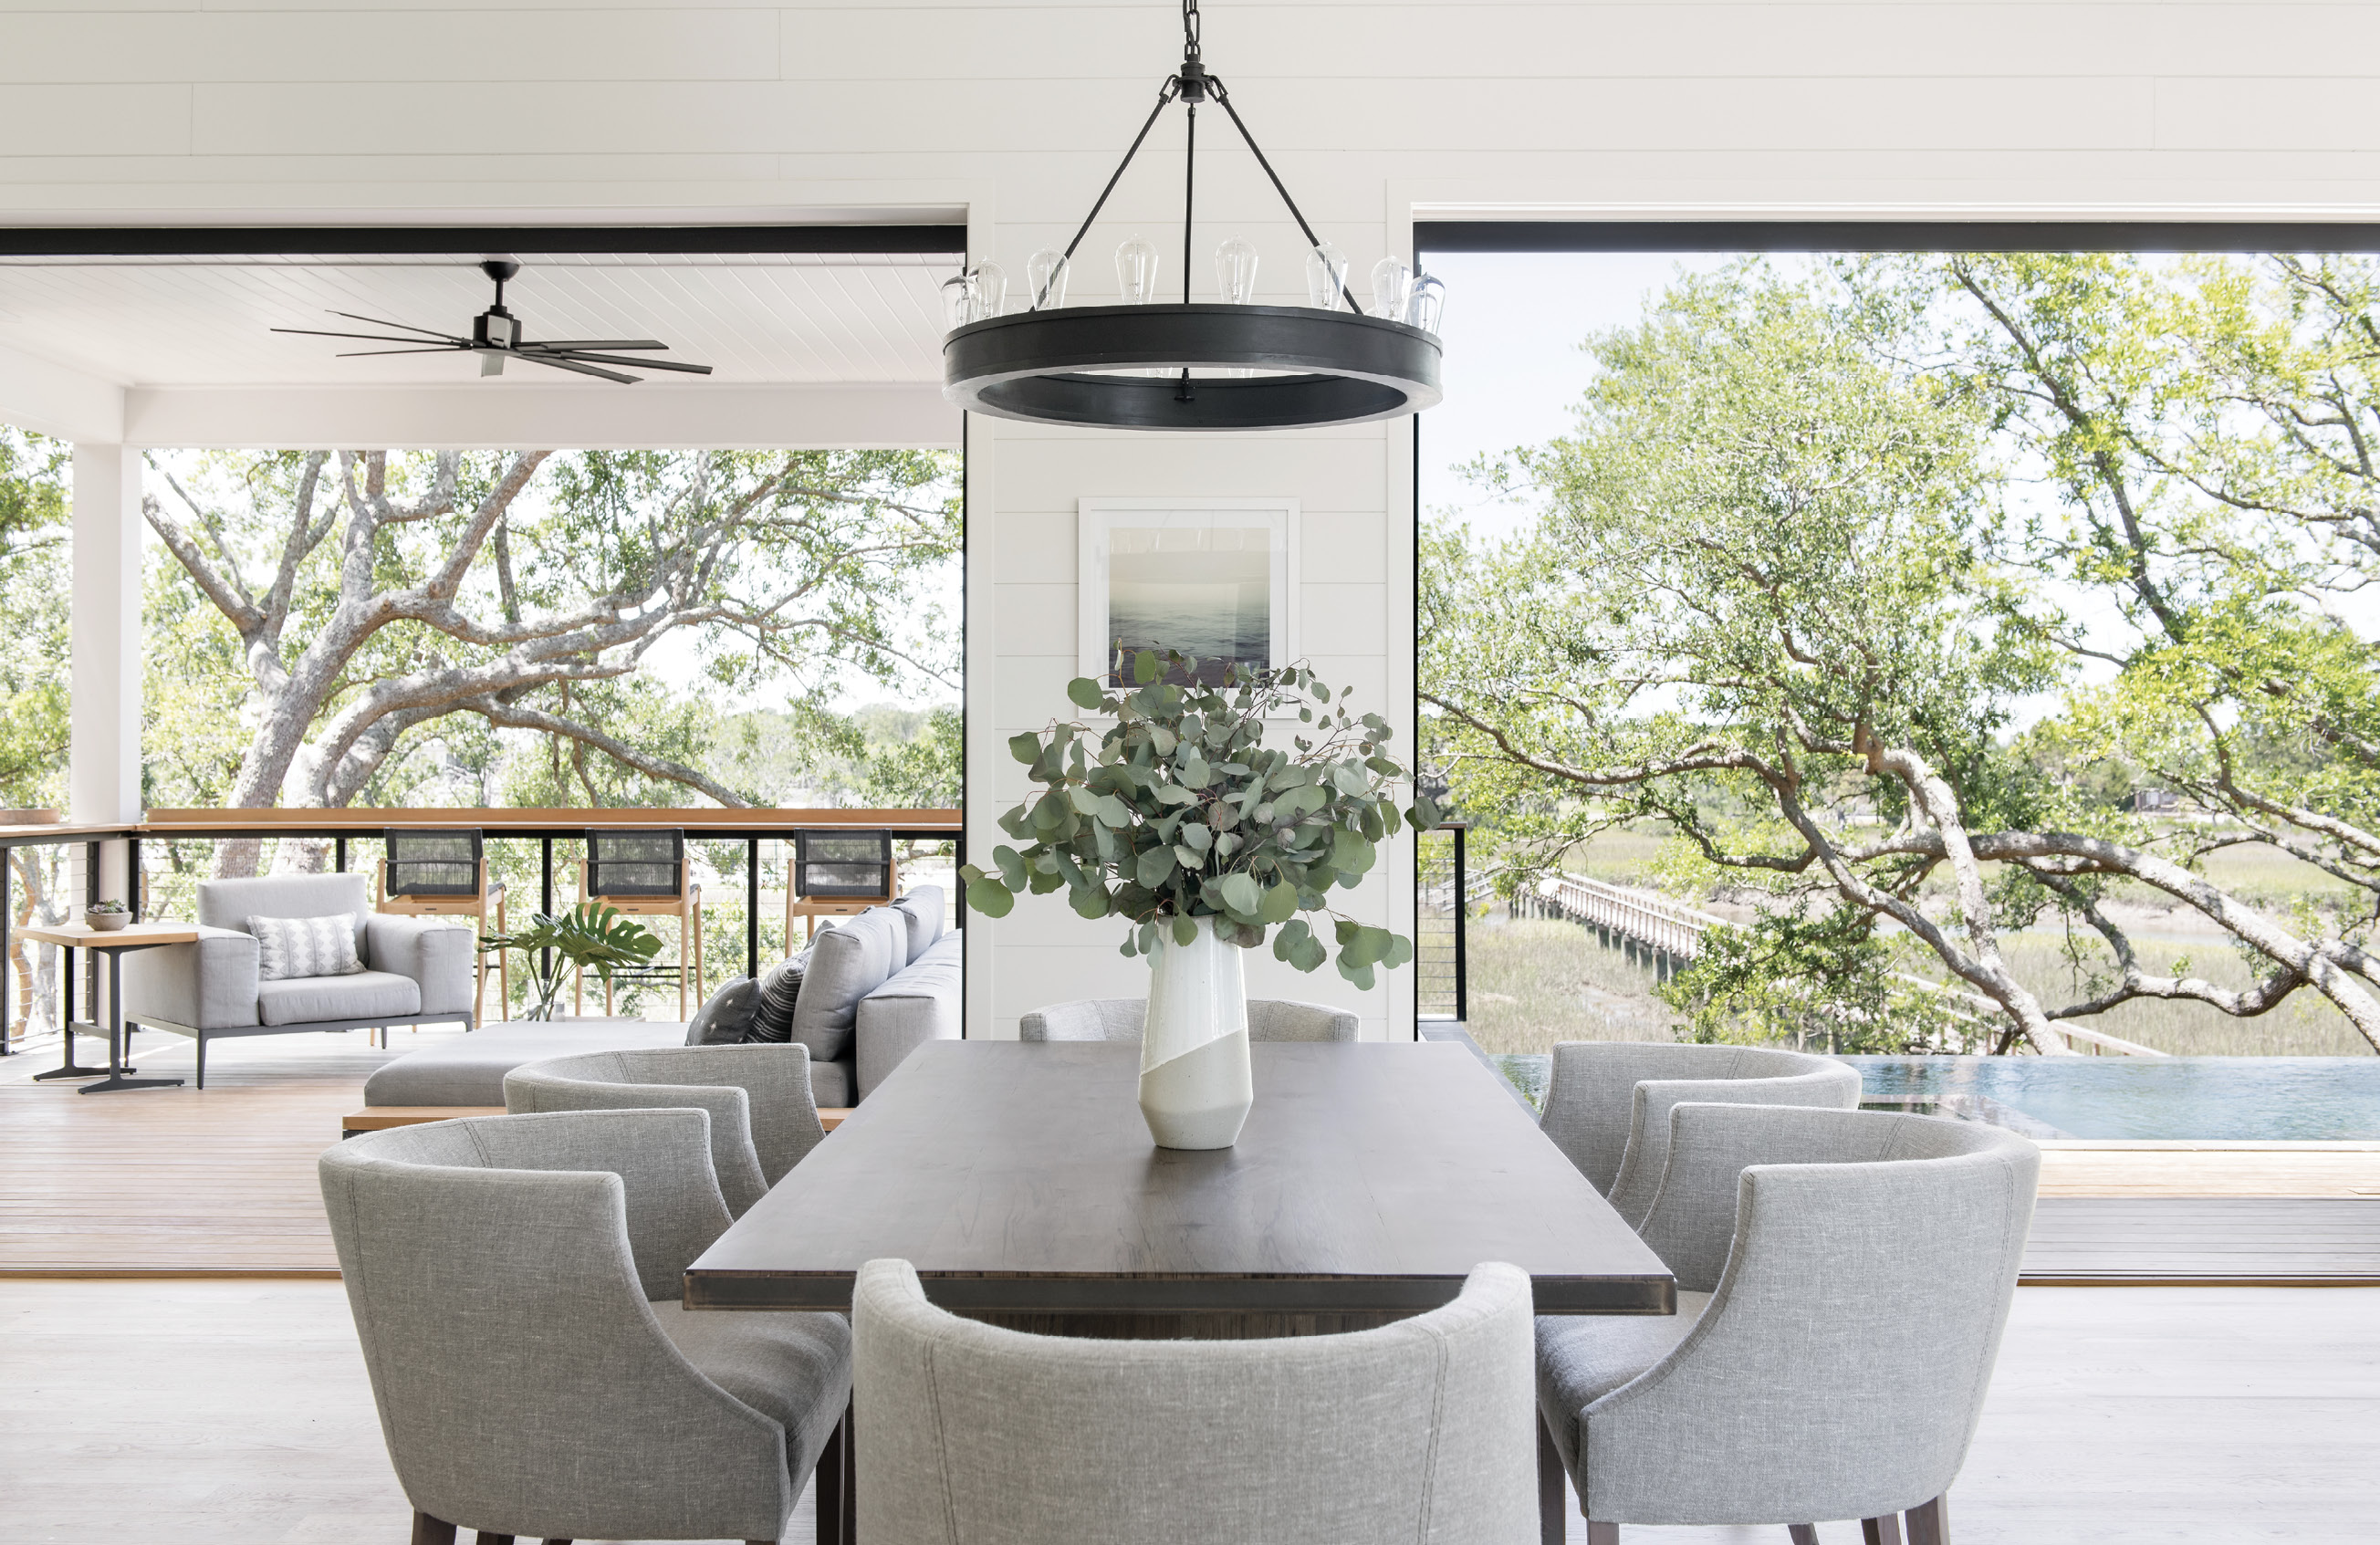 On A Limb: “From the start, my clear goal was to bring the outdoors in for an open-living, tree-house concept,” explains Melissa Lenox, who designed the interiors of the home. “All main living spaces and the master were intended to bring the unique and beautiful Lowcountry nature indoors.” She chose neutral colors for the furniture, such as the HomeNature sectional and Verellen dining chairs, and incorporated soft marsh hues in accent pieces like paintings, rugs, and pillows.